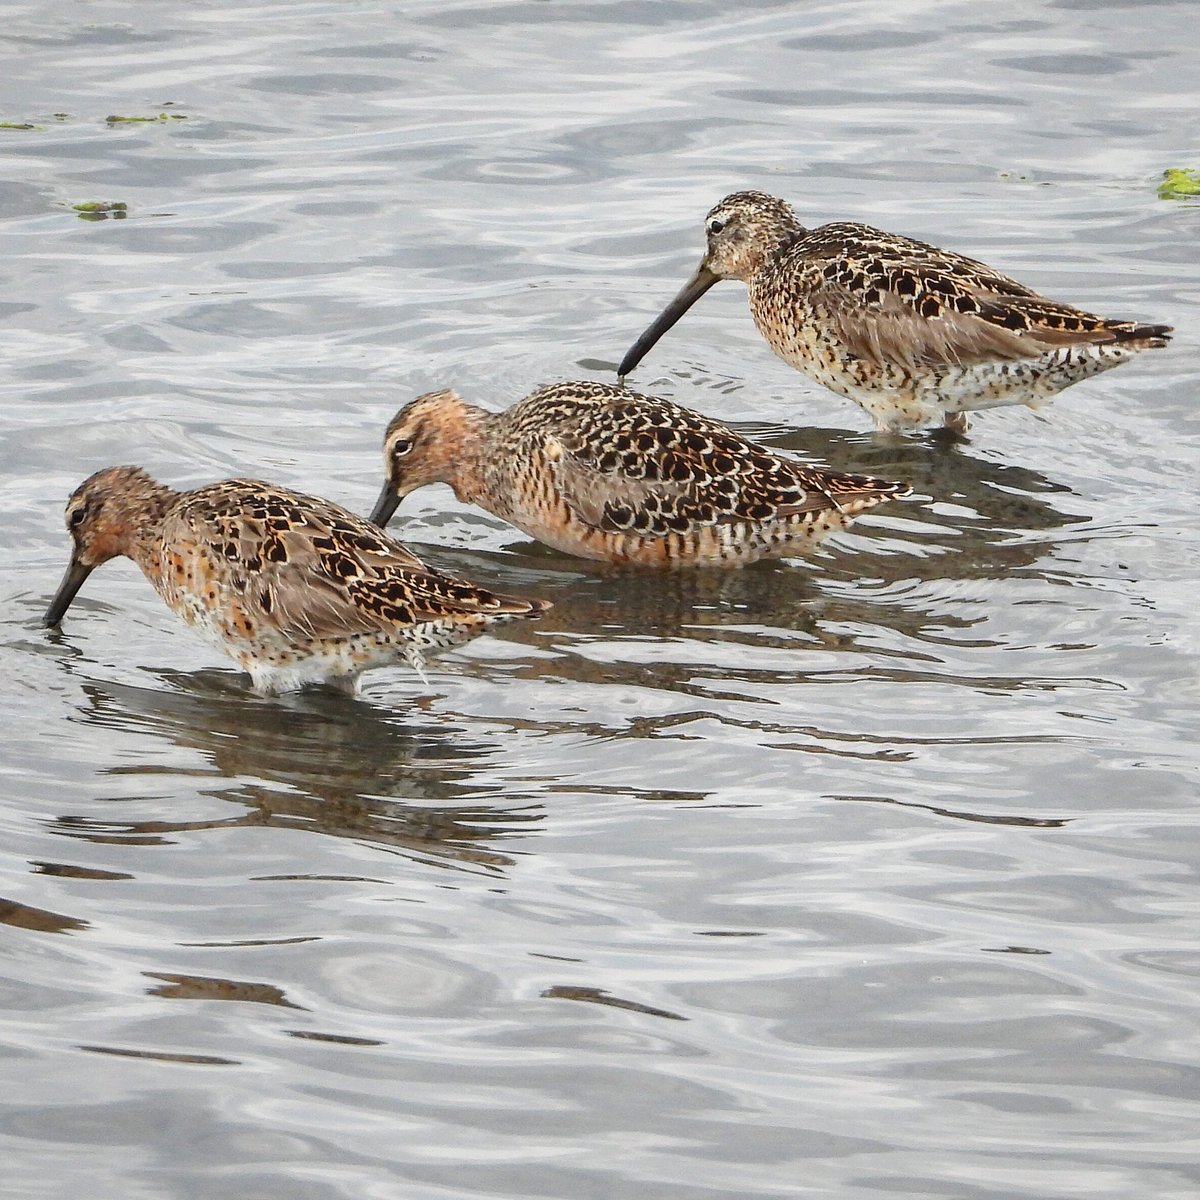 It’s #WorldMigratoryBirdDay2021 and dowitchers feed on boundary bay yesterday - our Fraser river delta and bay are such Important Bird Areas! We must protect and conserve them. #nature #wildlife #birds #vanbirdparty #vancouverbirds #fraserriver #birdscanada #migratorybirds